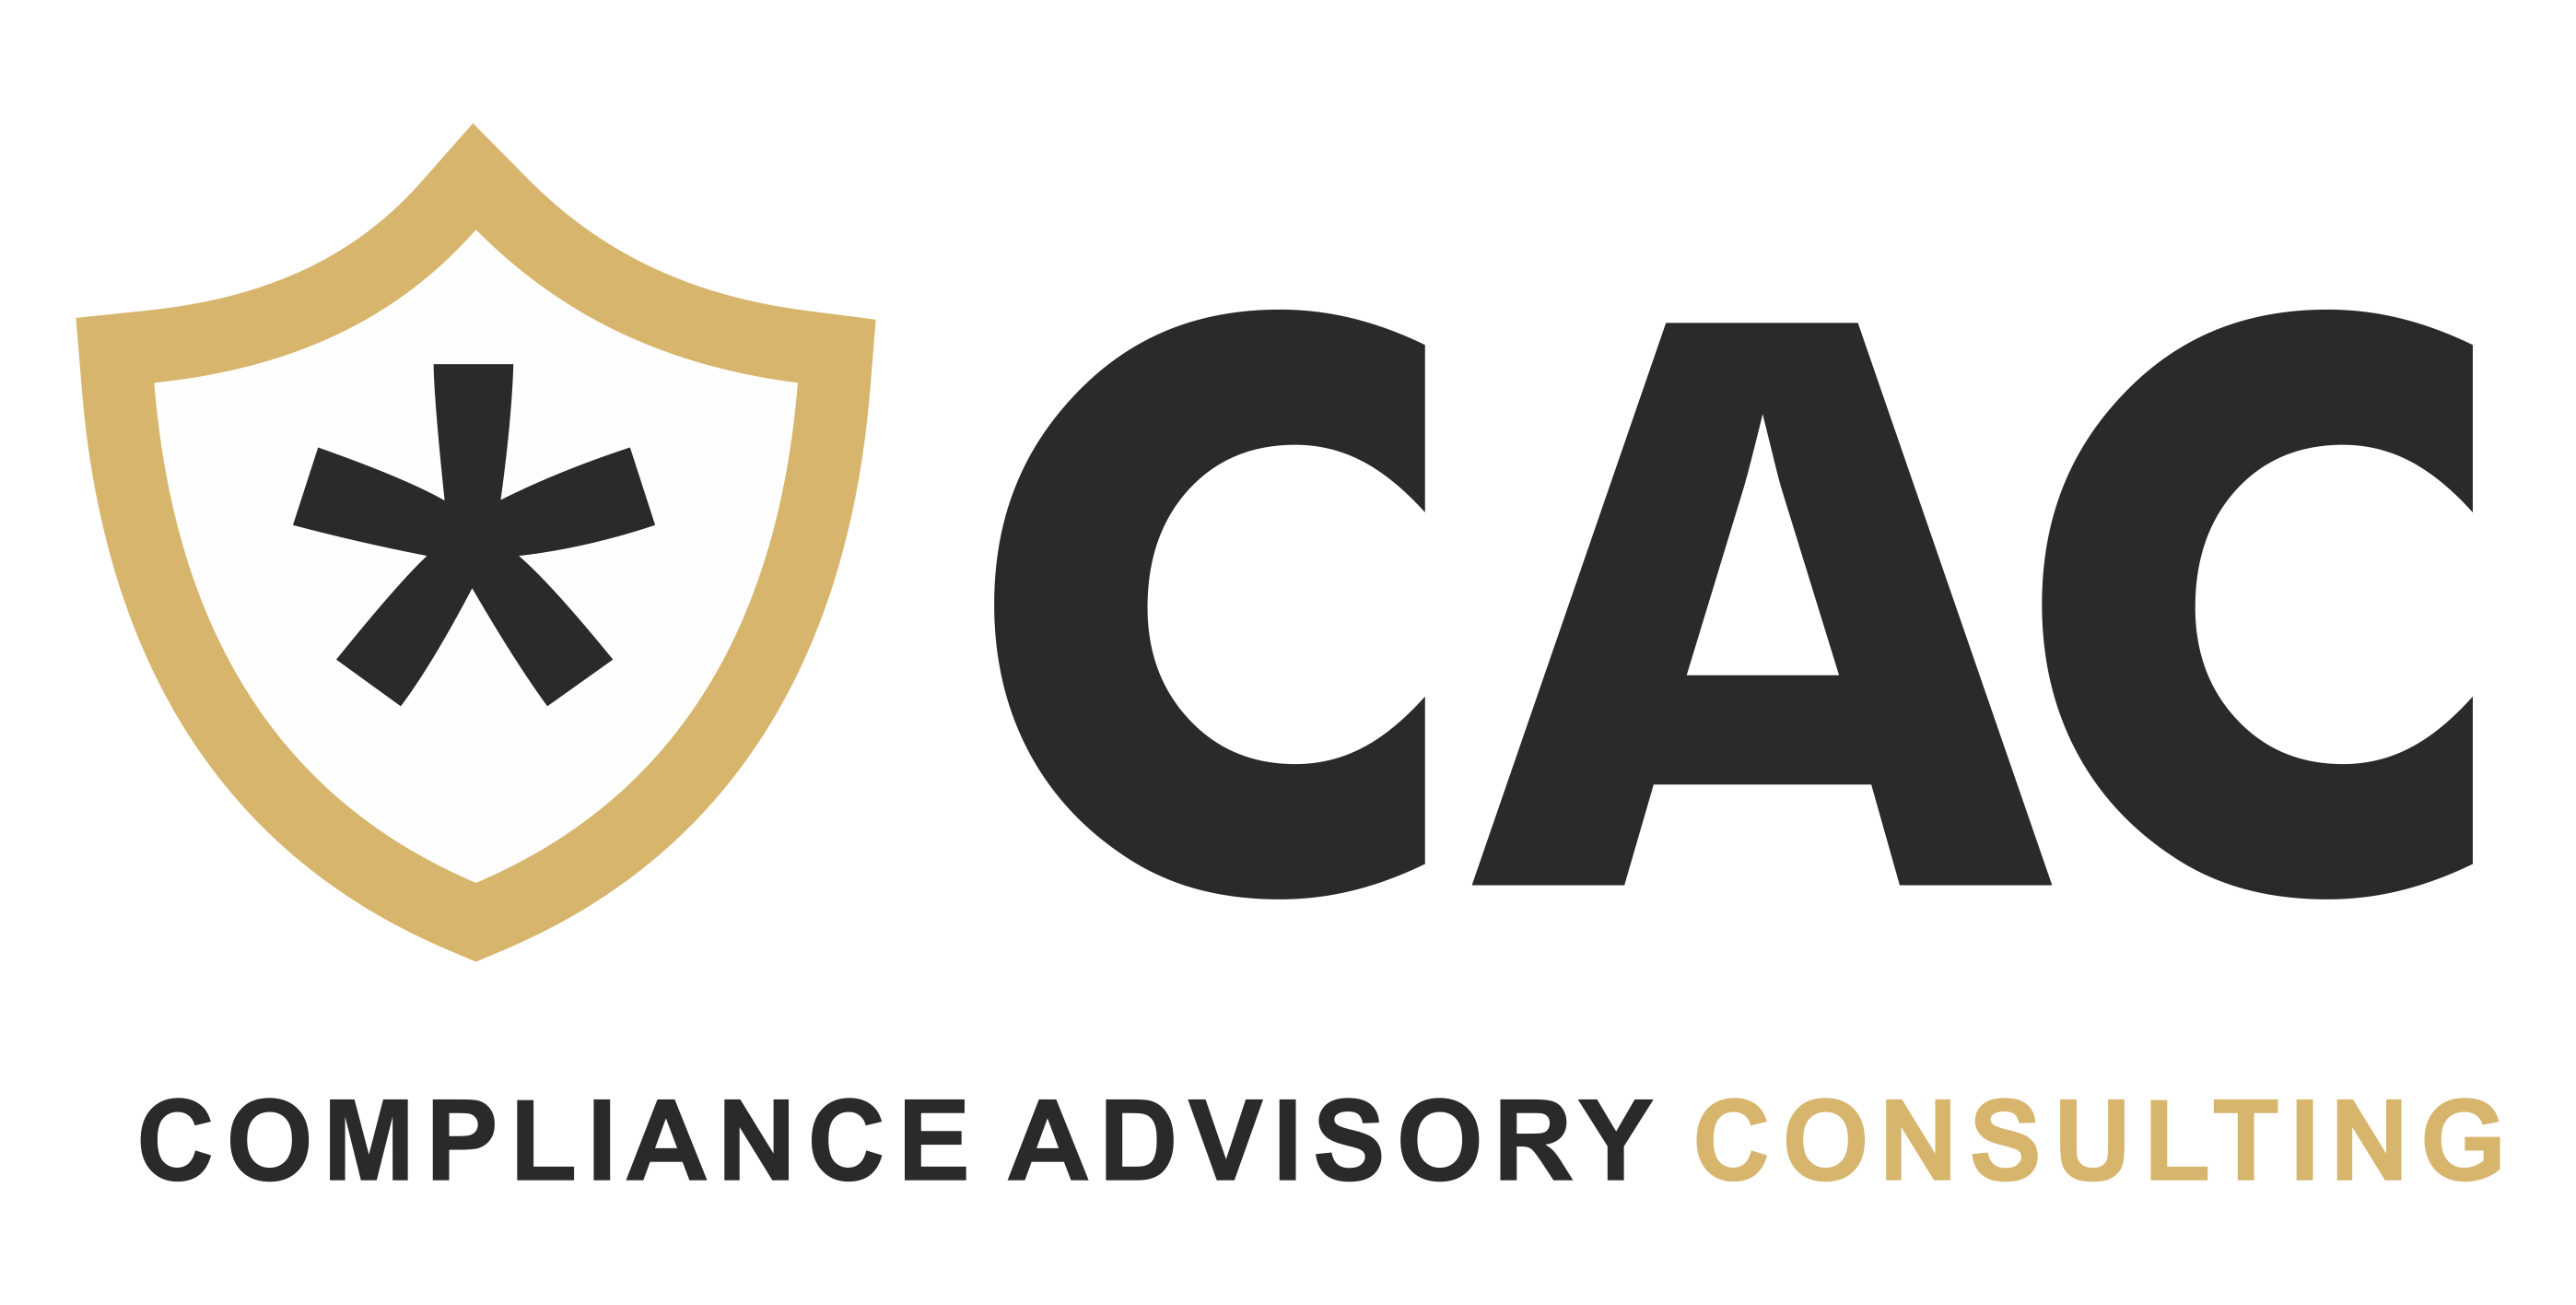 Compliance Advisory Consulting